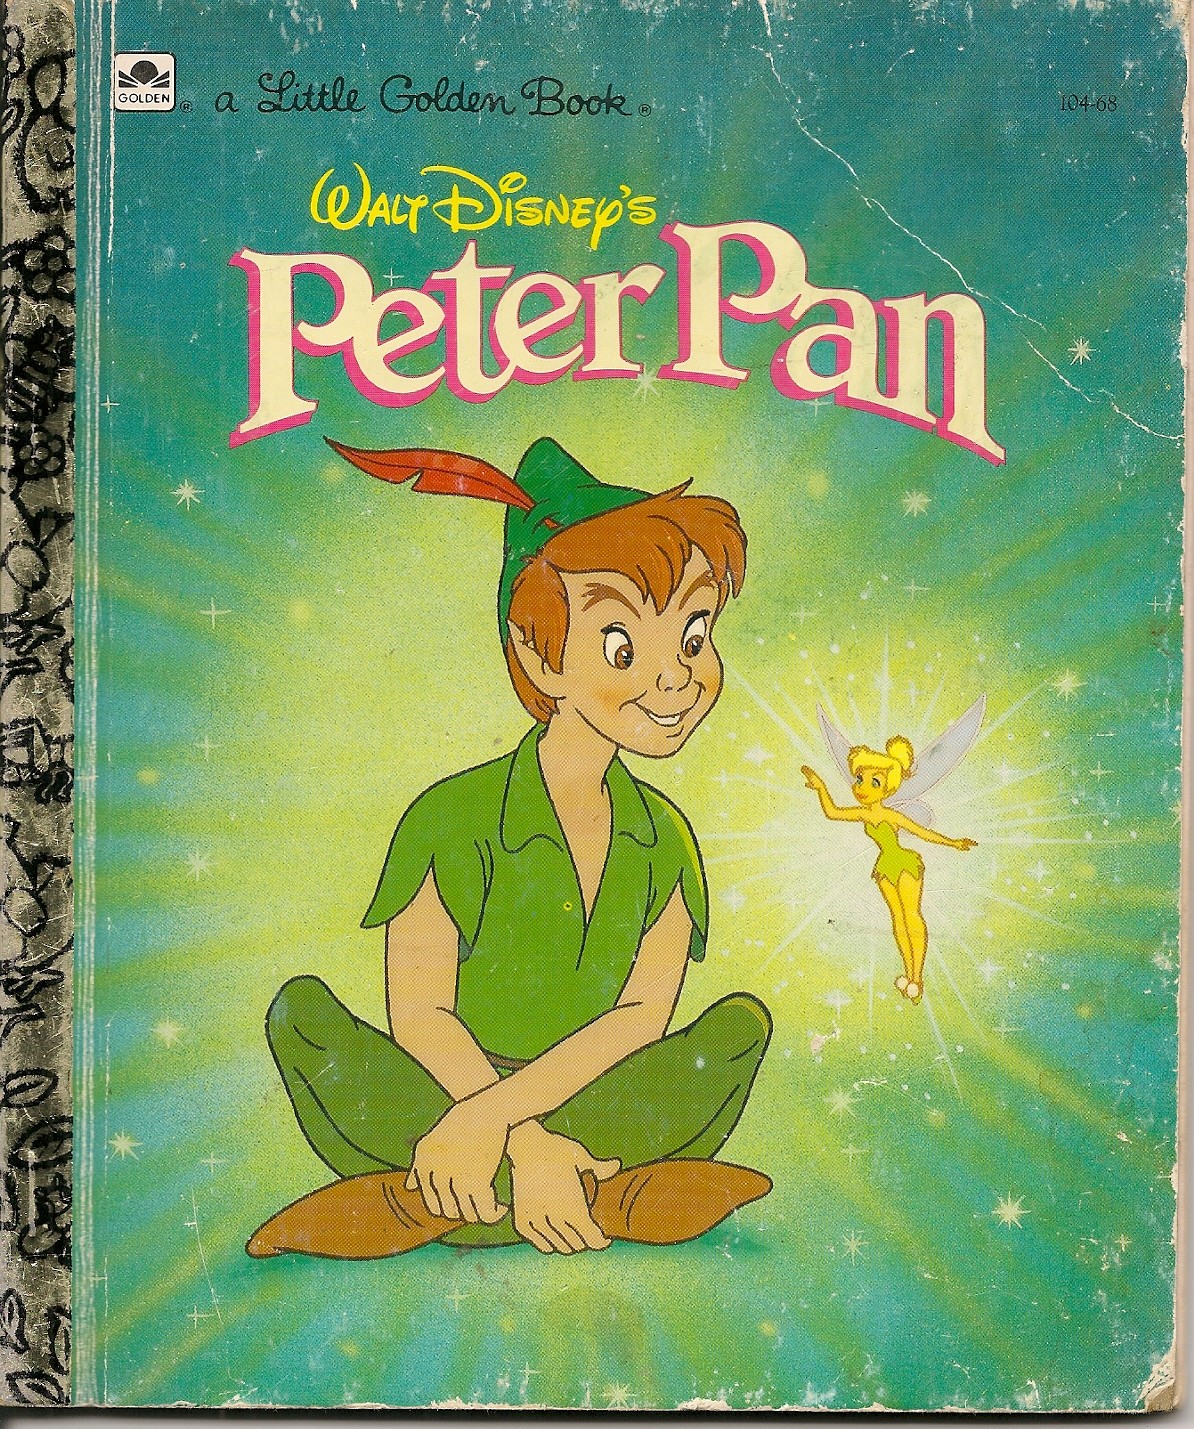 The Many Movie Incarnations of Peter Pan | LitReactor